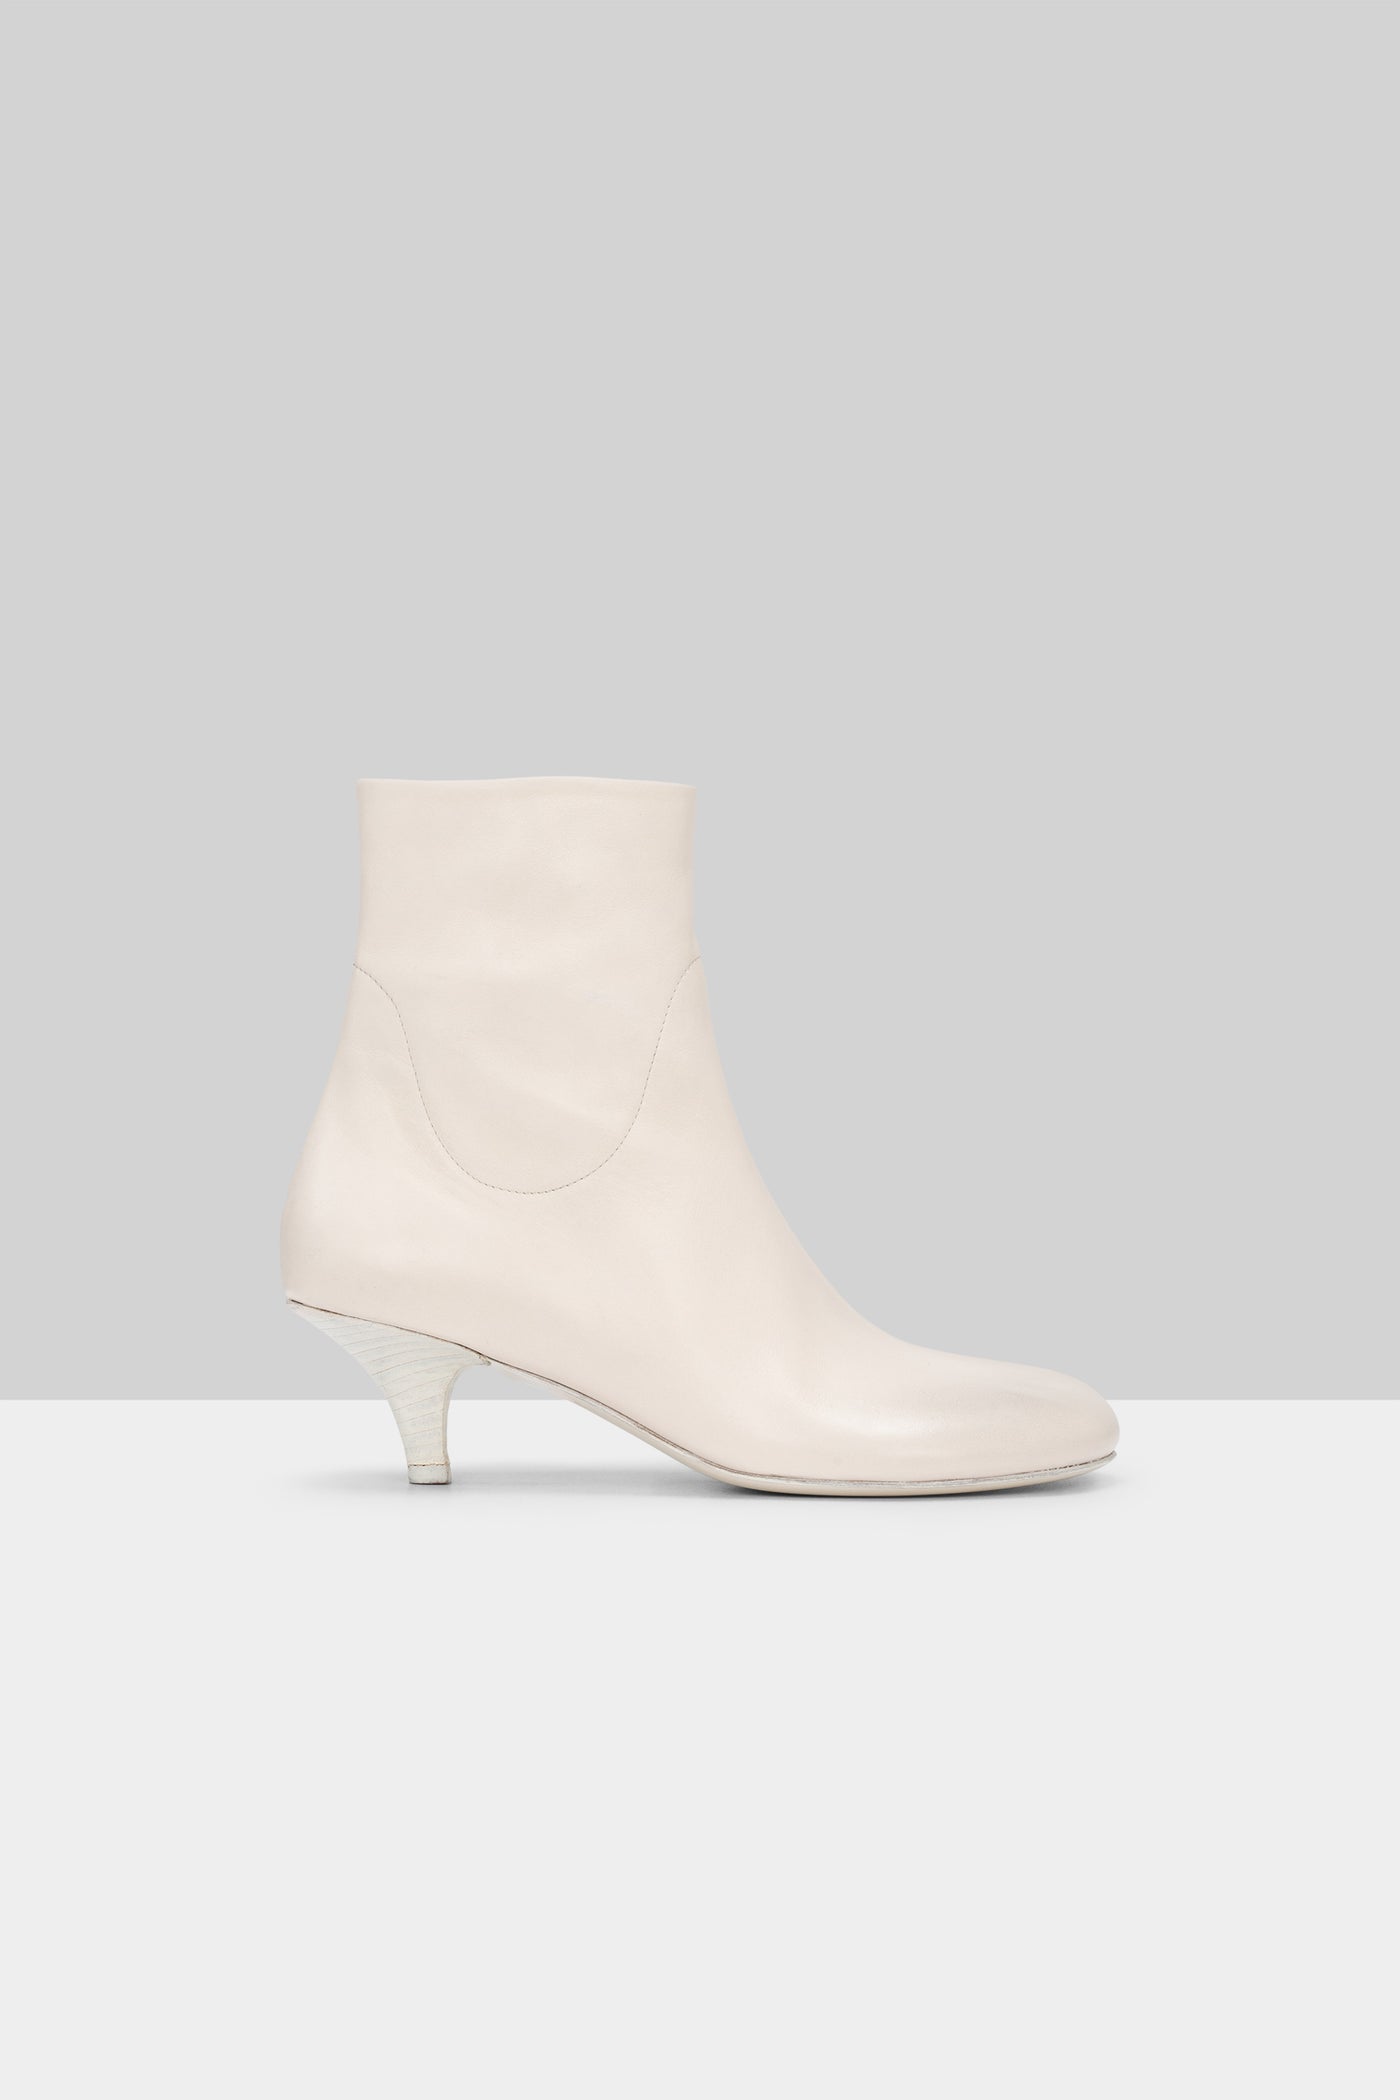 Marsell-Spilla-Ankle-Boot-Amarees-2